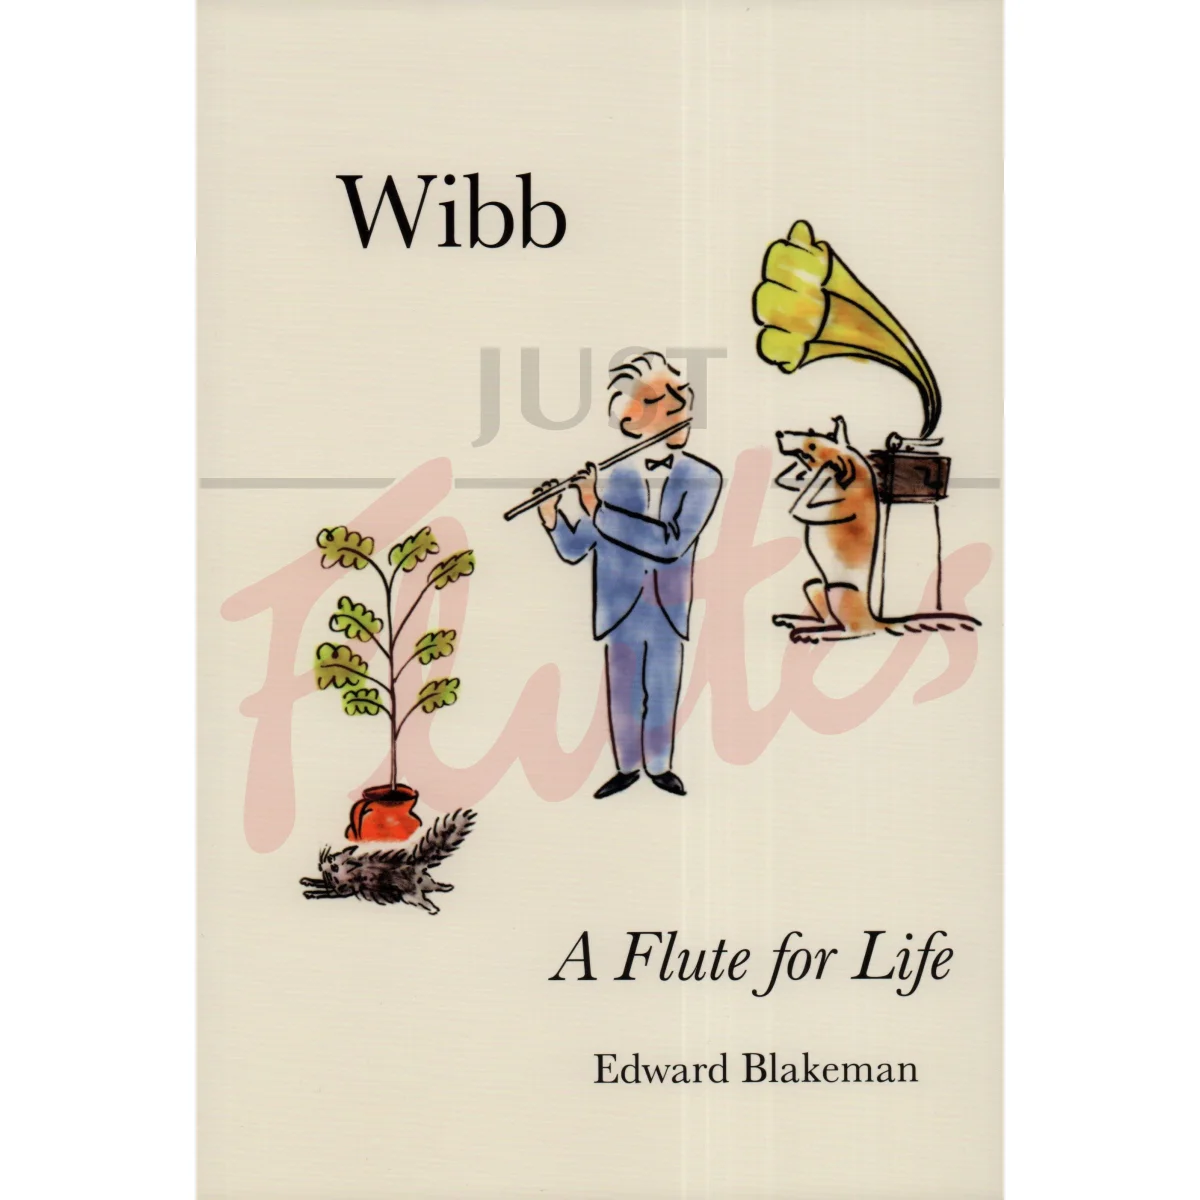 Wibb: A Flute for Life